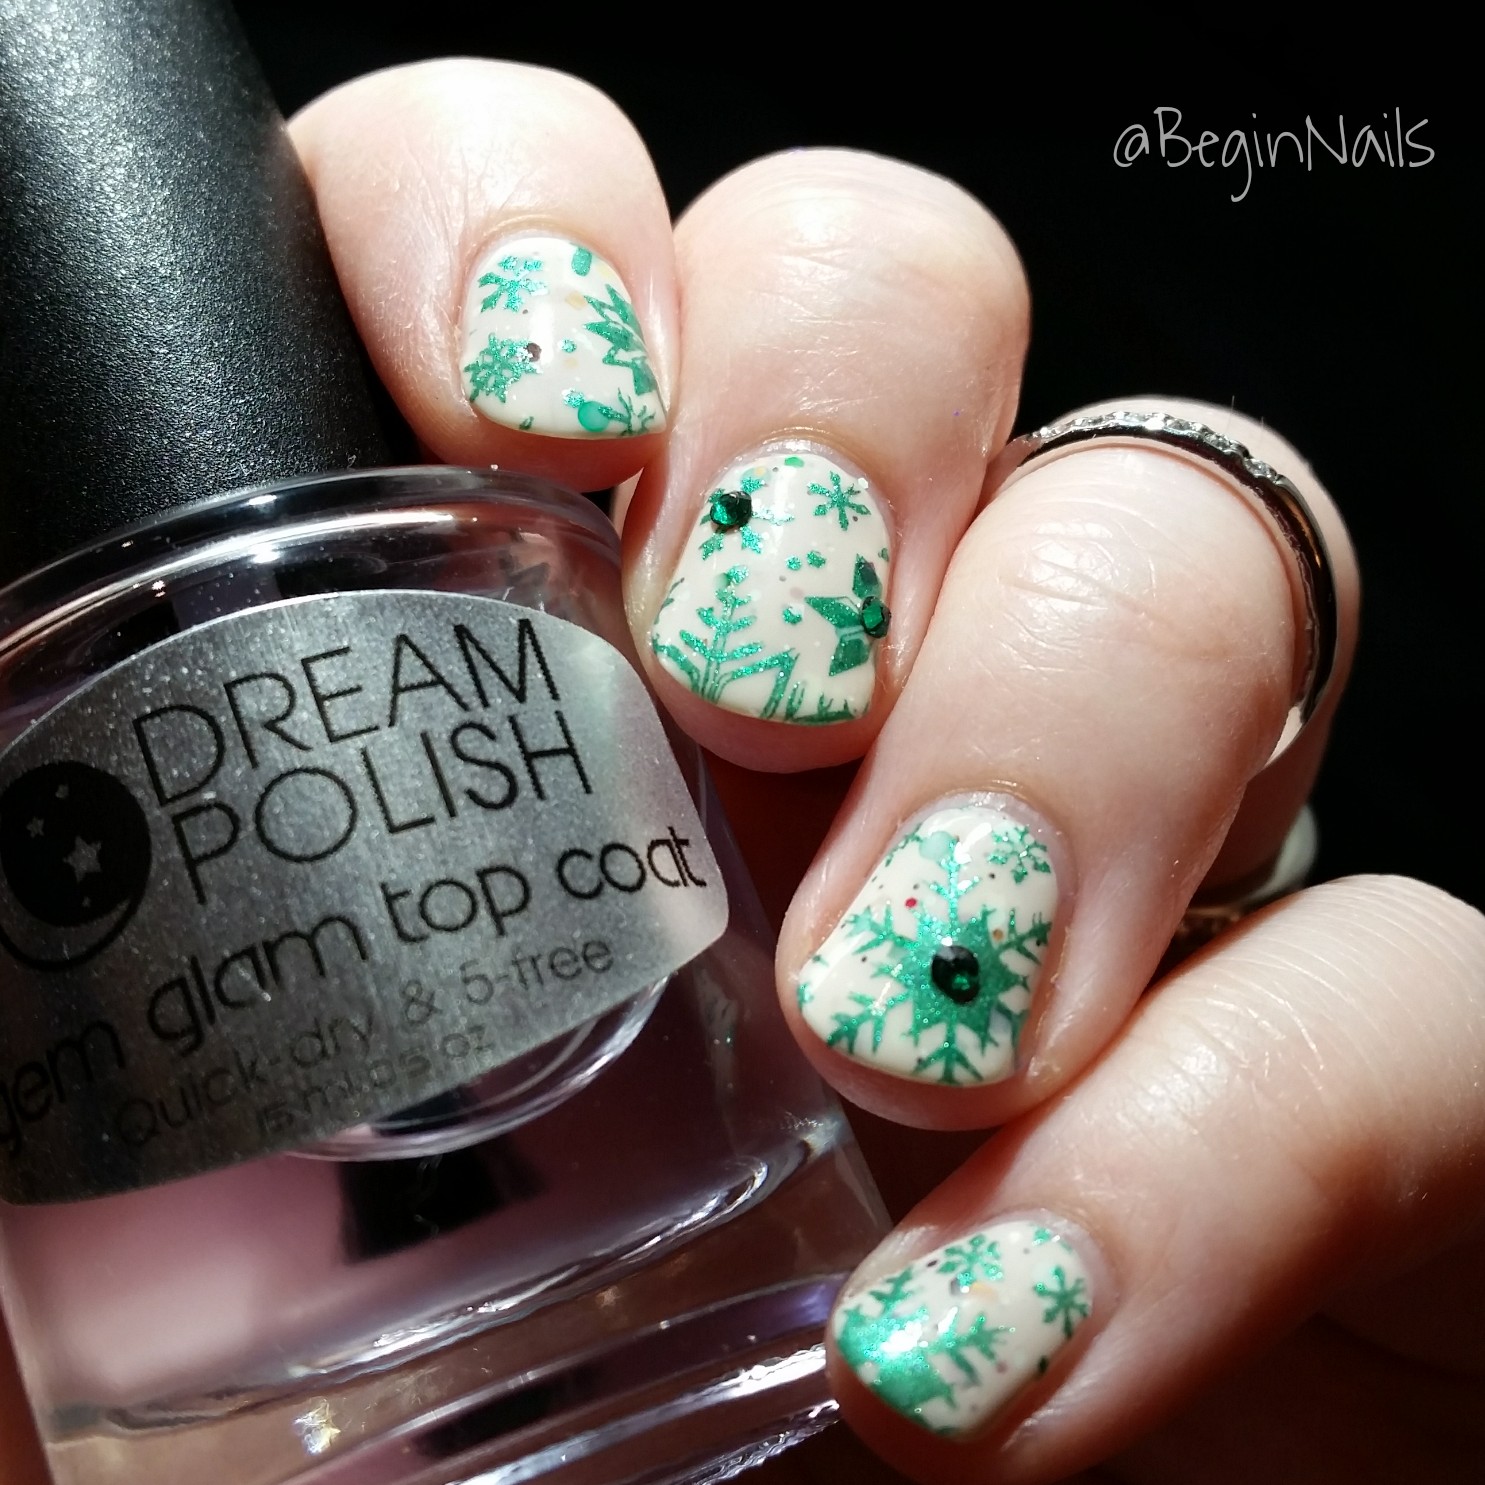 Let's Begin Nails: Dream Polish Winter Scent Product Review (and nail art!)